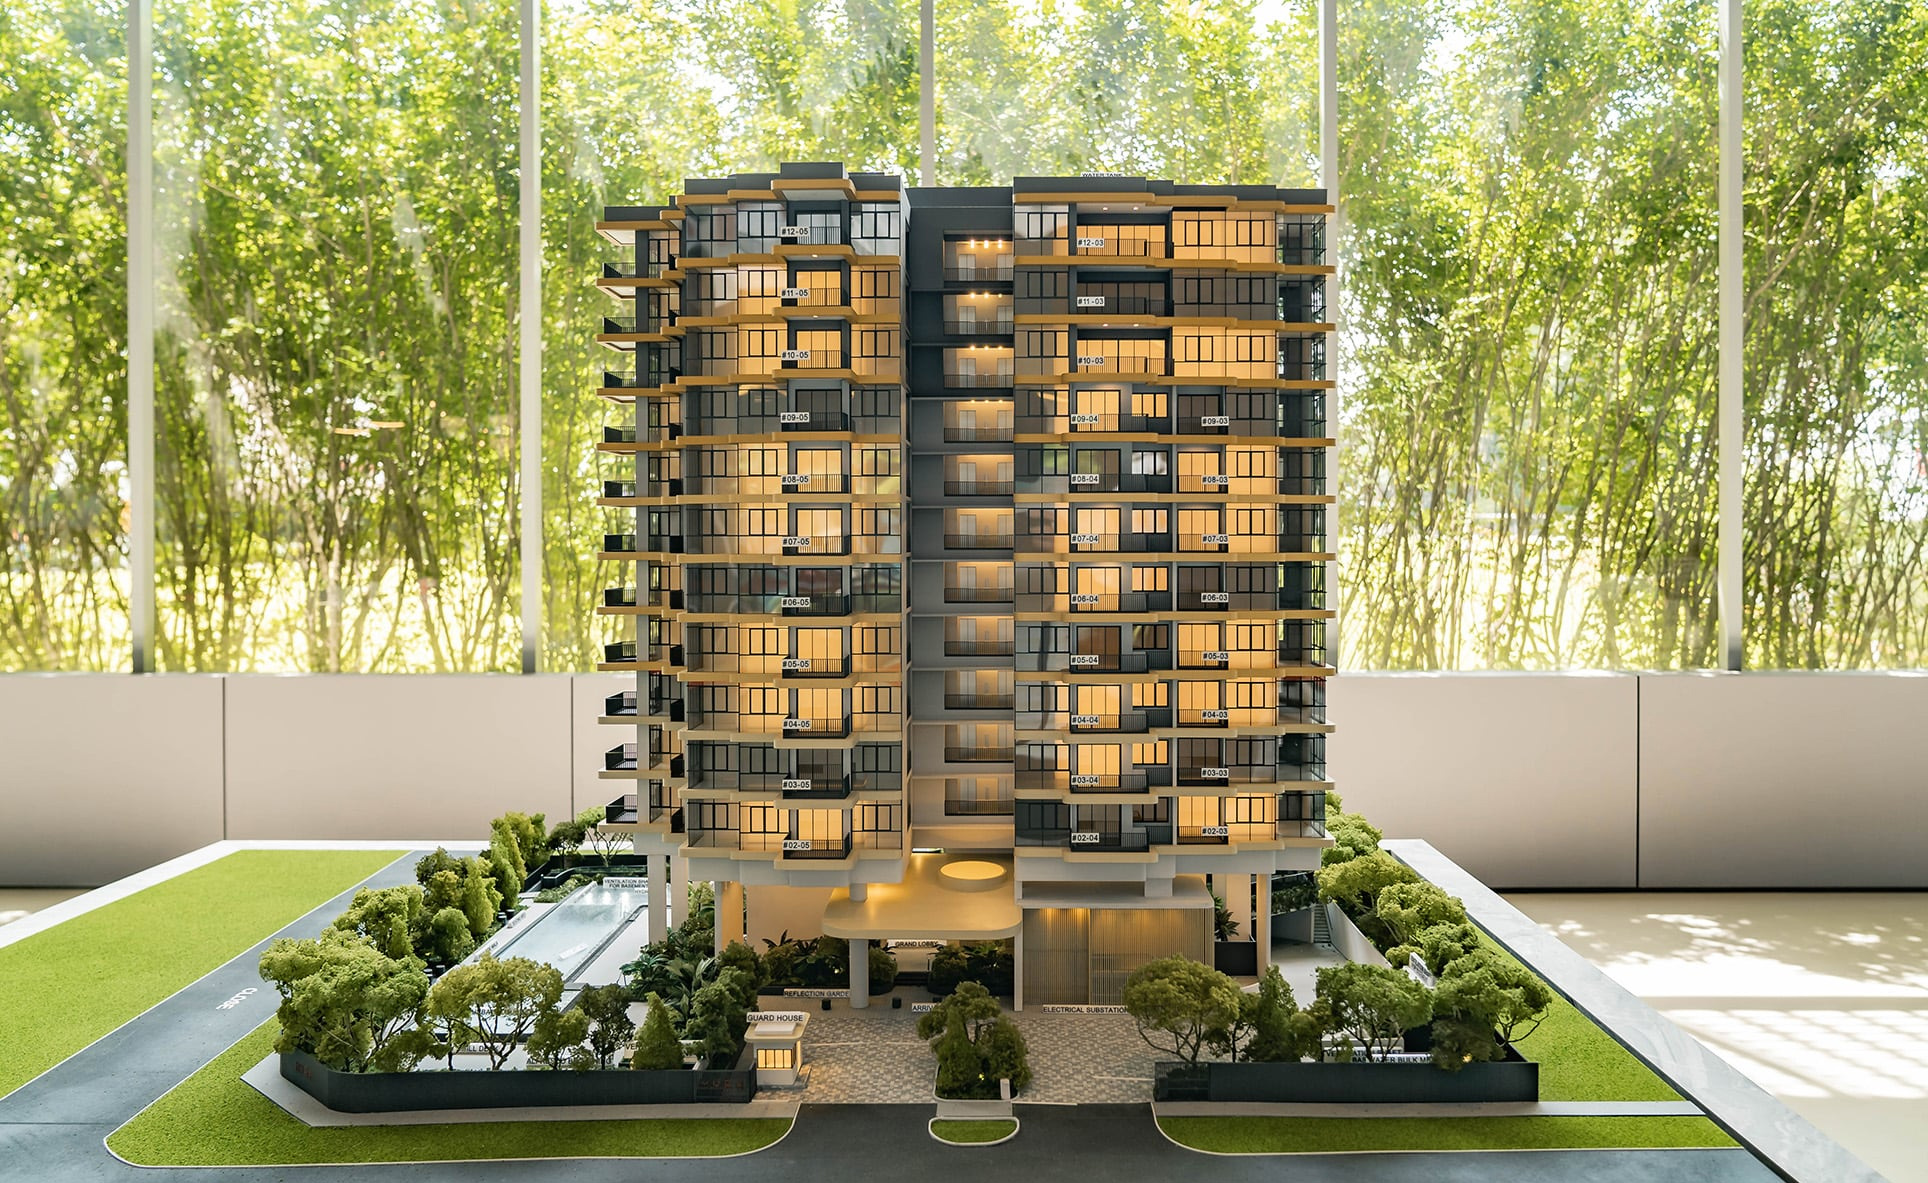 Myra Condo stands 12-storey tall and comprises of only 85 residential units ranging from 1 to 4-bedroom apartments.